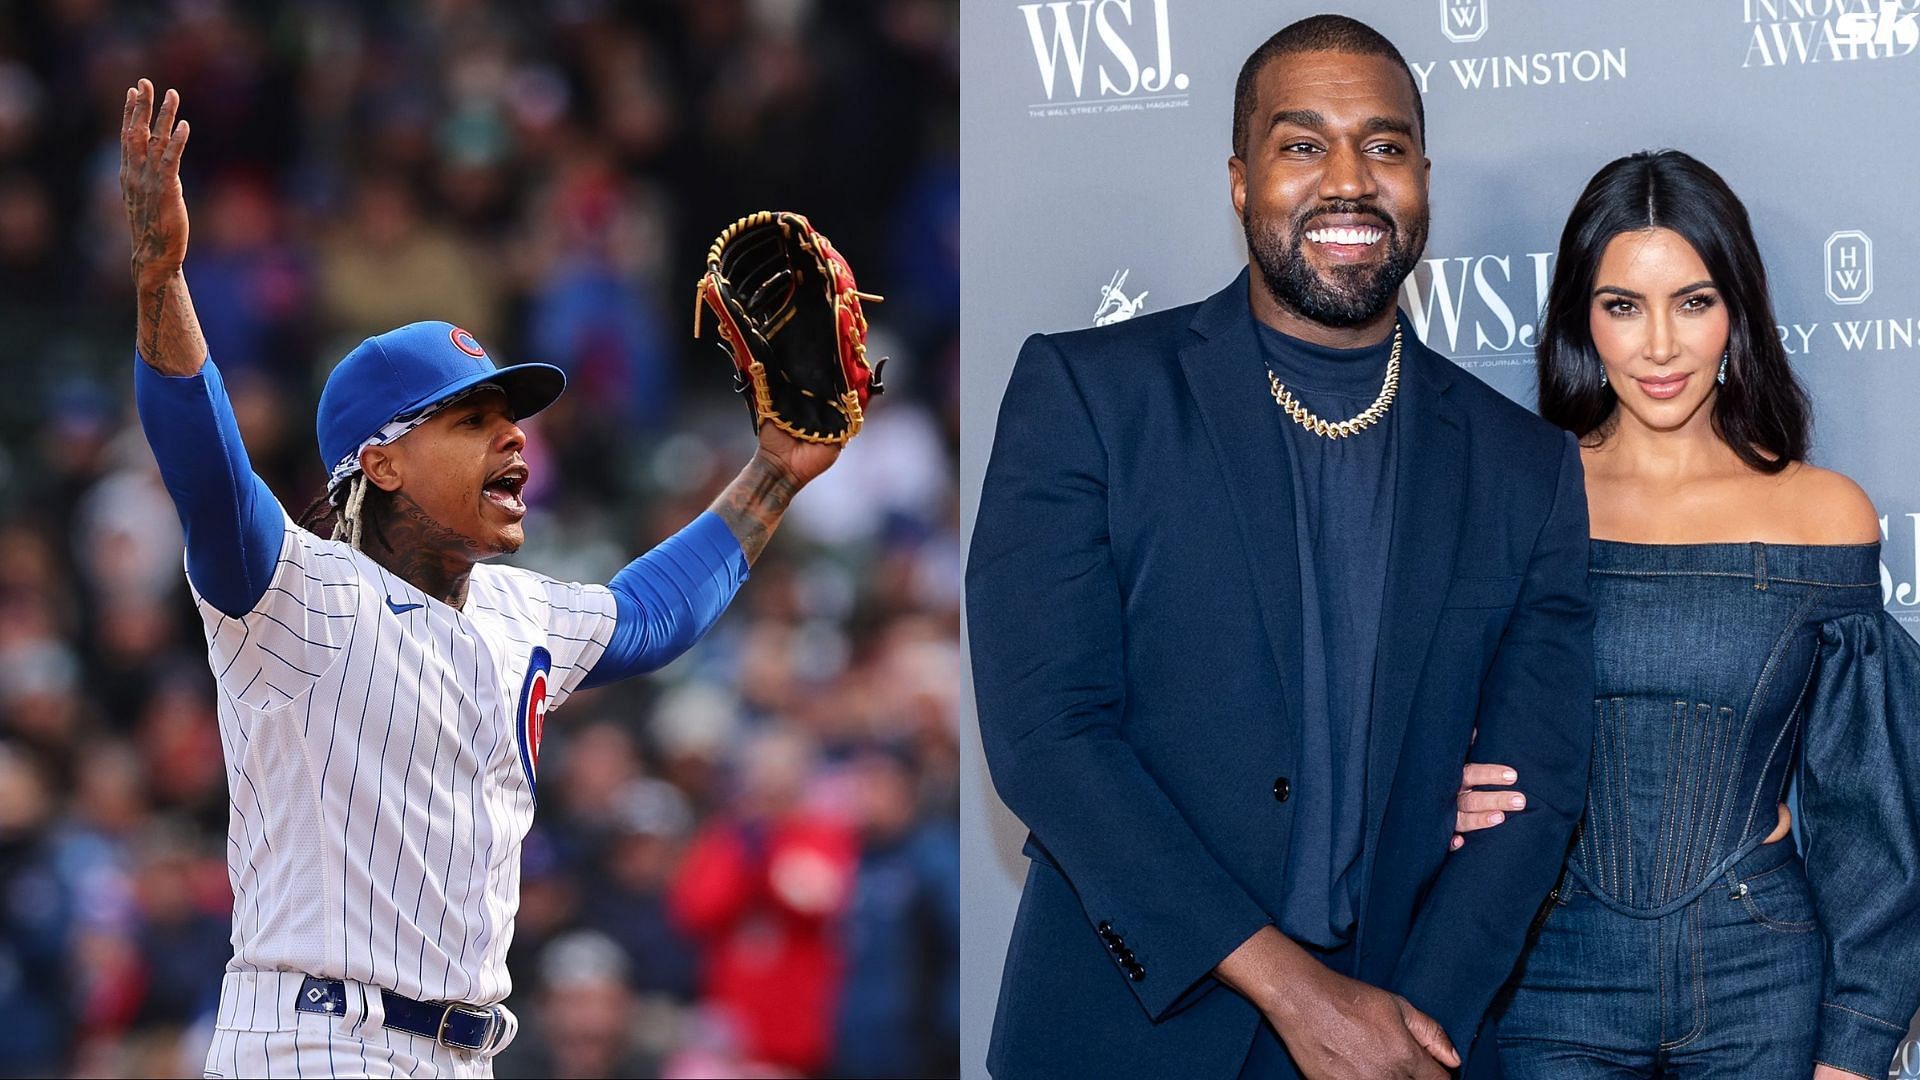 Marcus Stroman sided with Kanye West on his mutual decision to split with then wife Kim Kardashian